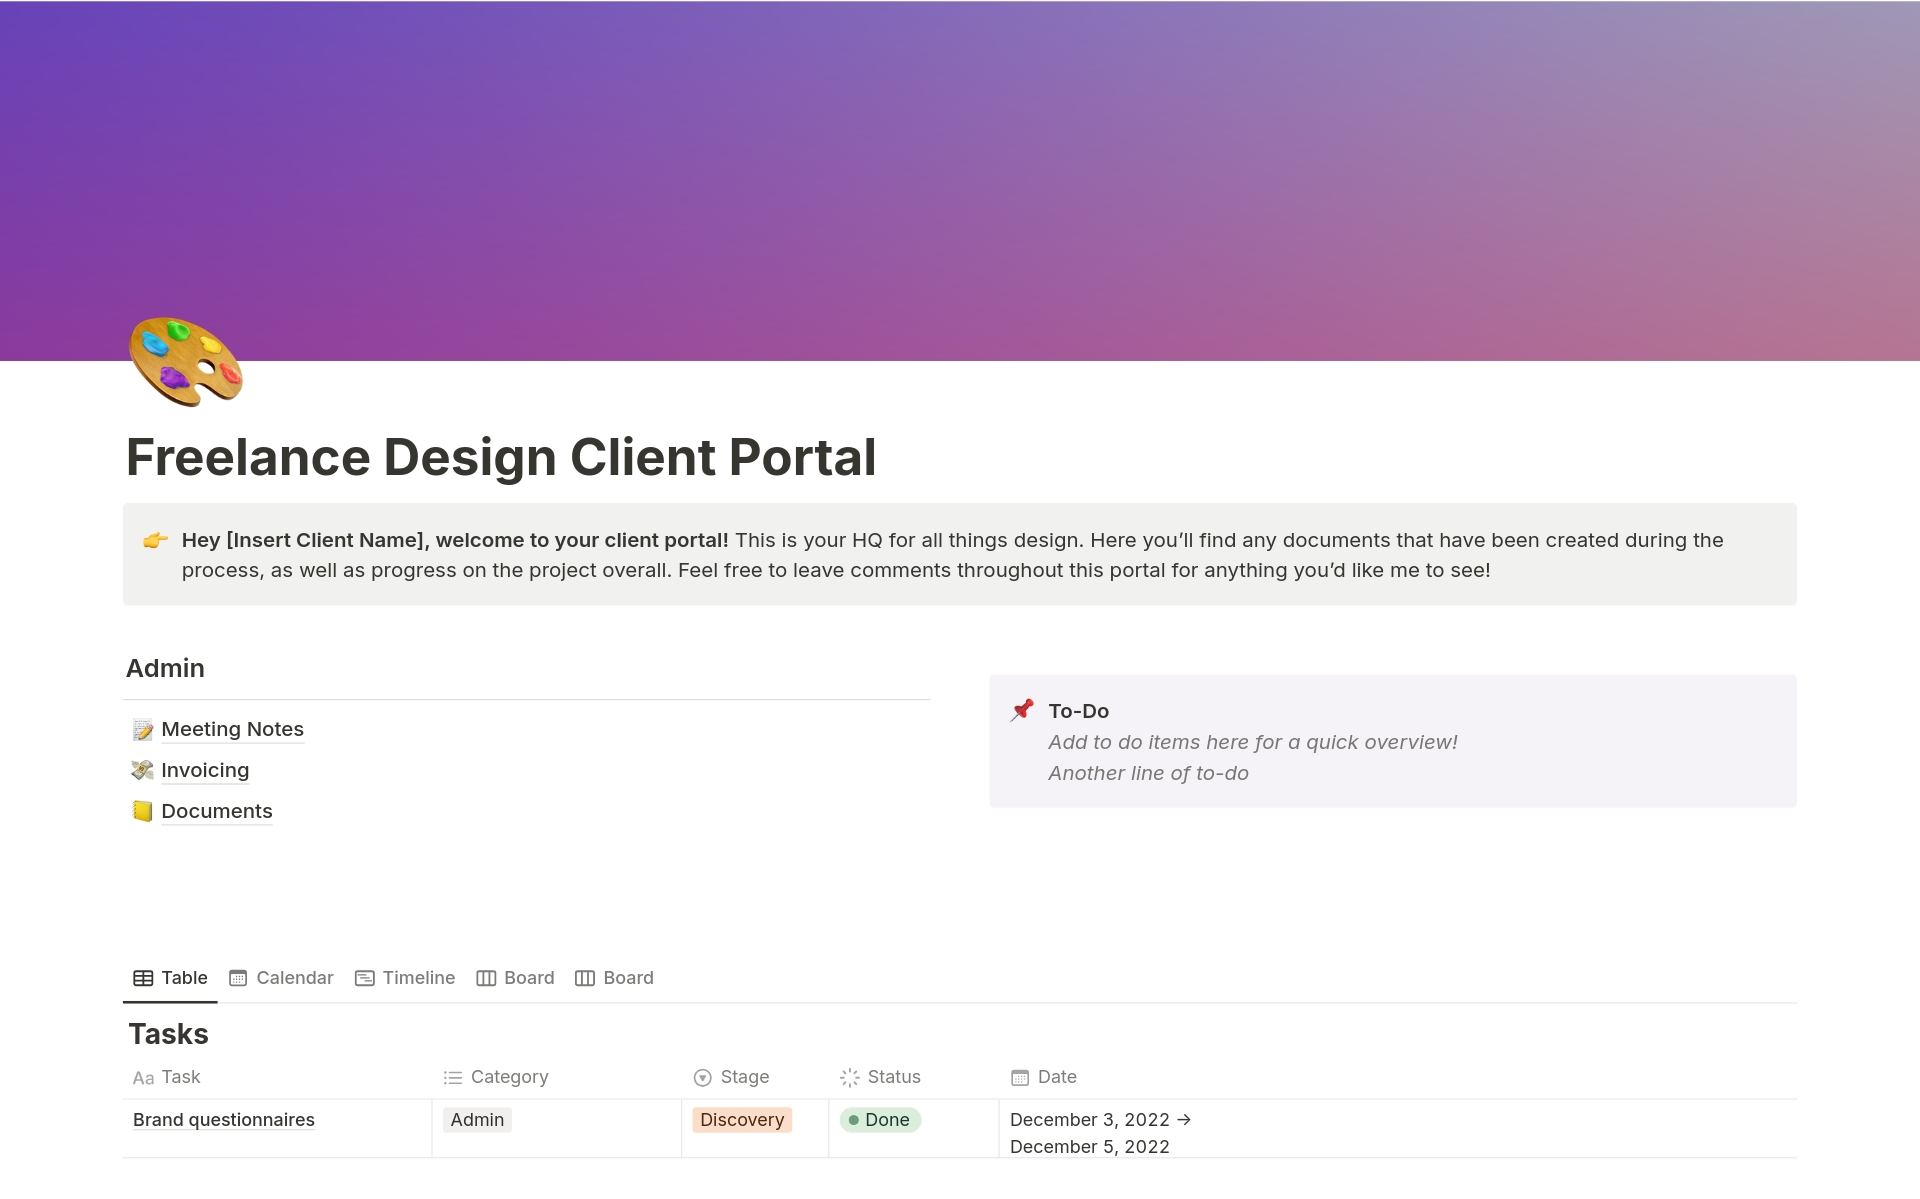 Elevate your freelance design business with our Client Portal Template. Streamline project management, collaborate effortlessly with clients, and impress with a professional presentation. Experience the difference today and take your business to new heights.